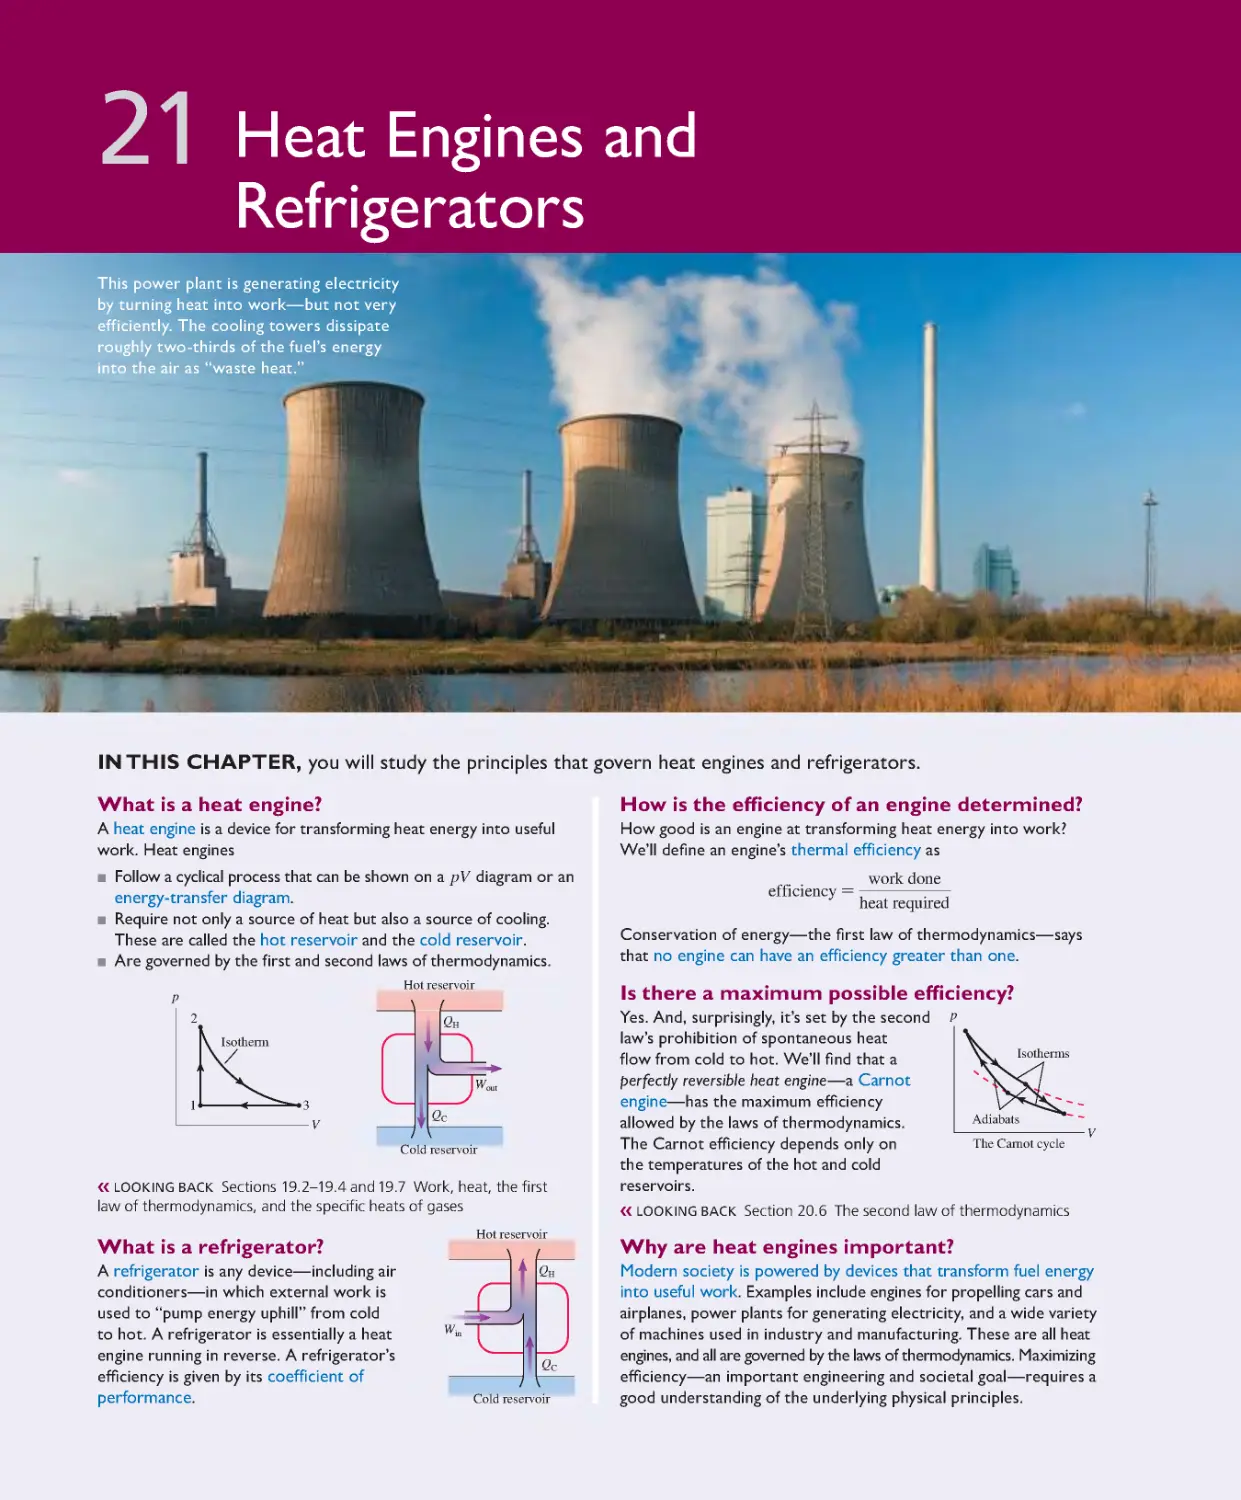 Chapter 21: Heat Engines and Refrigerators